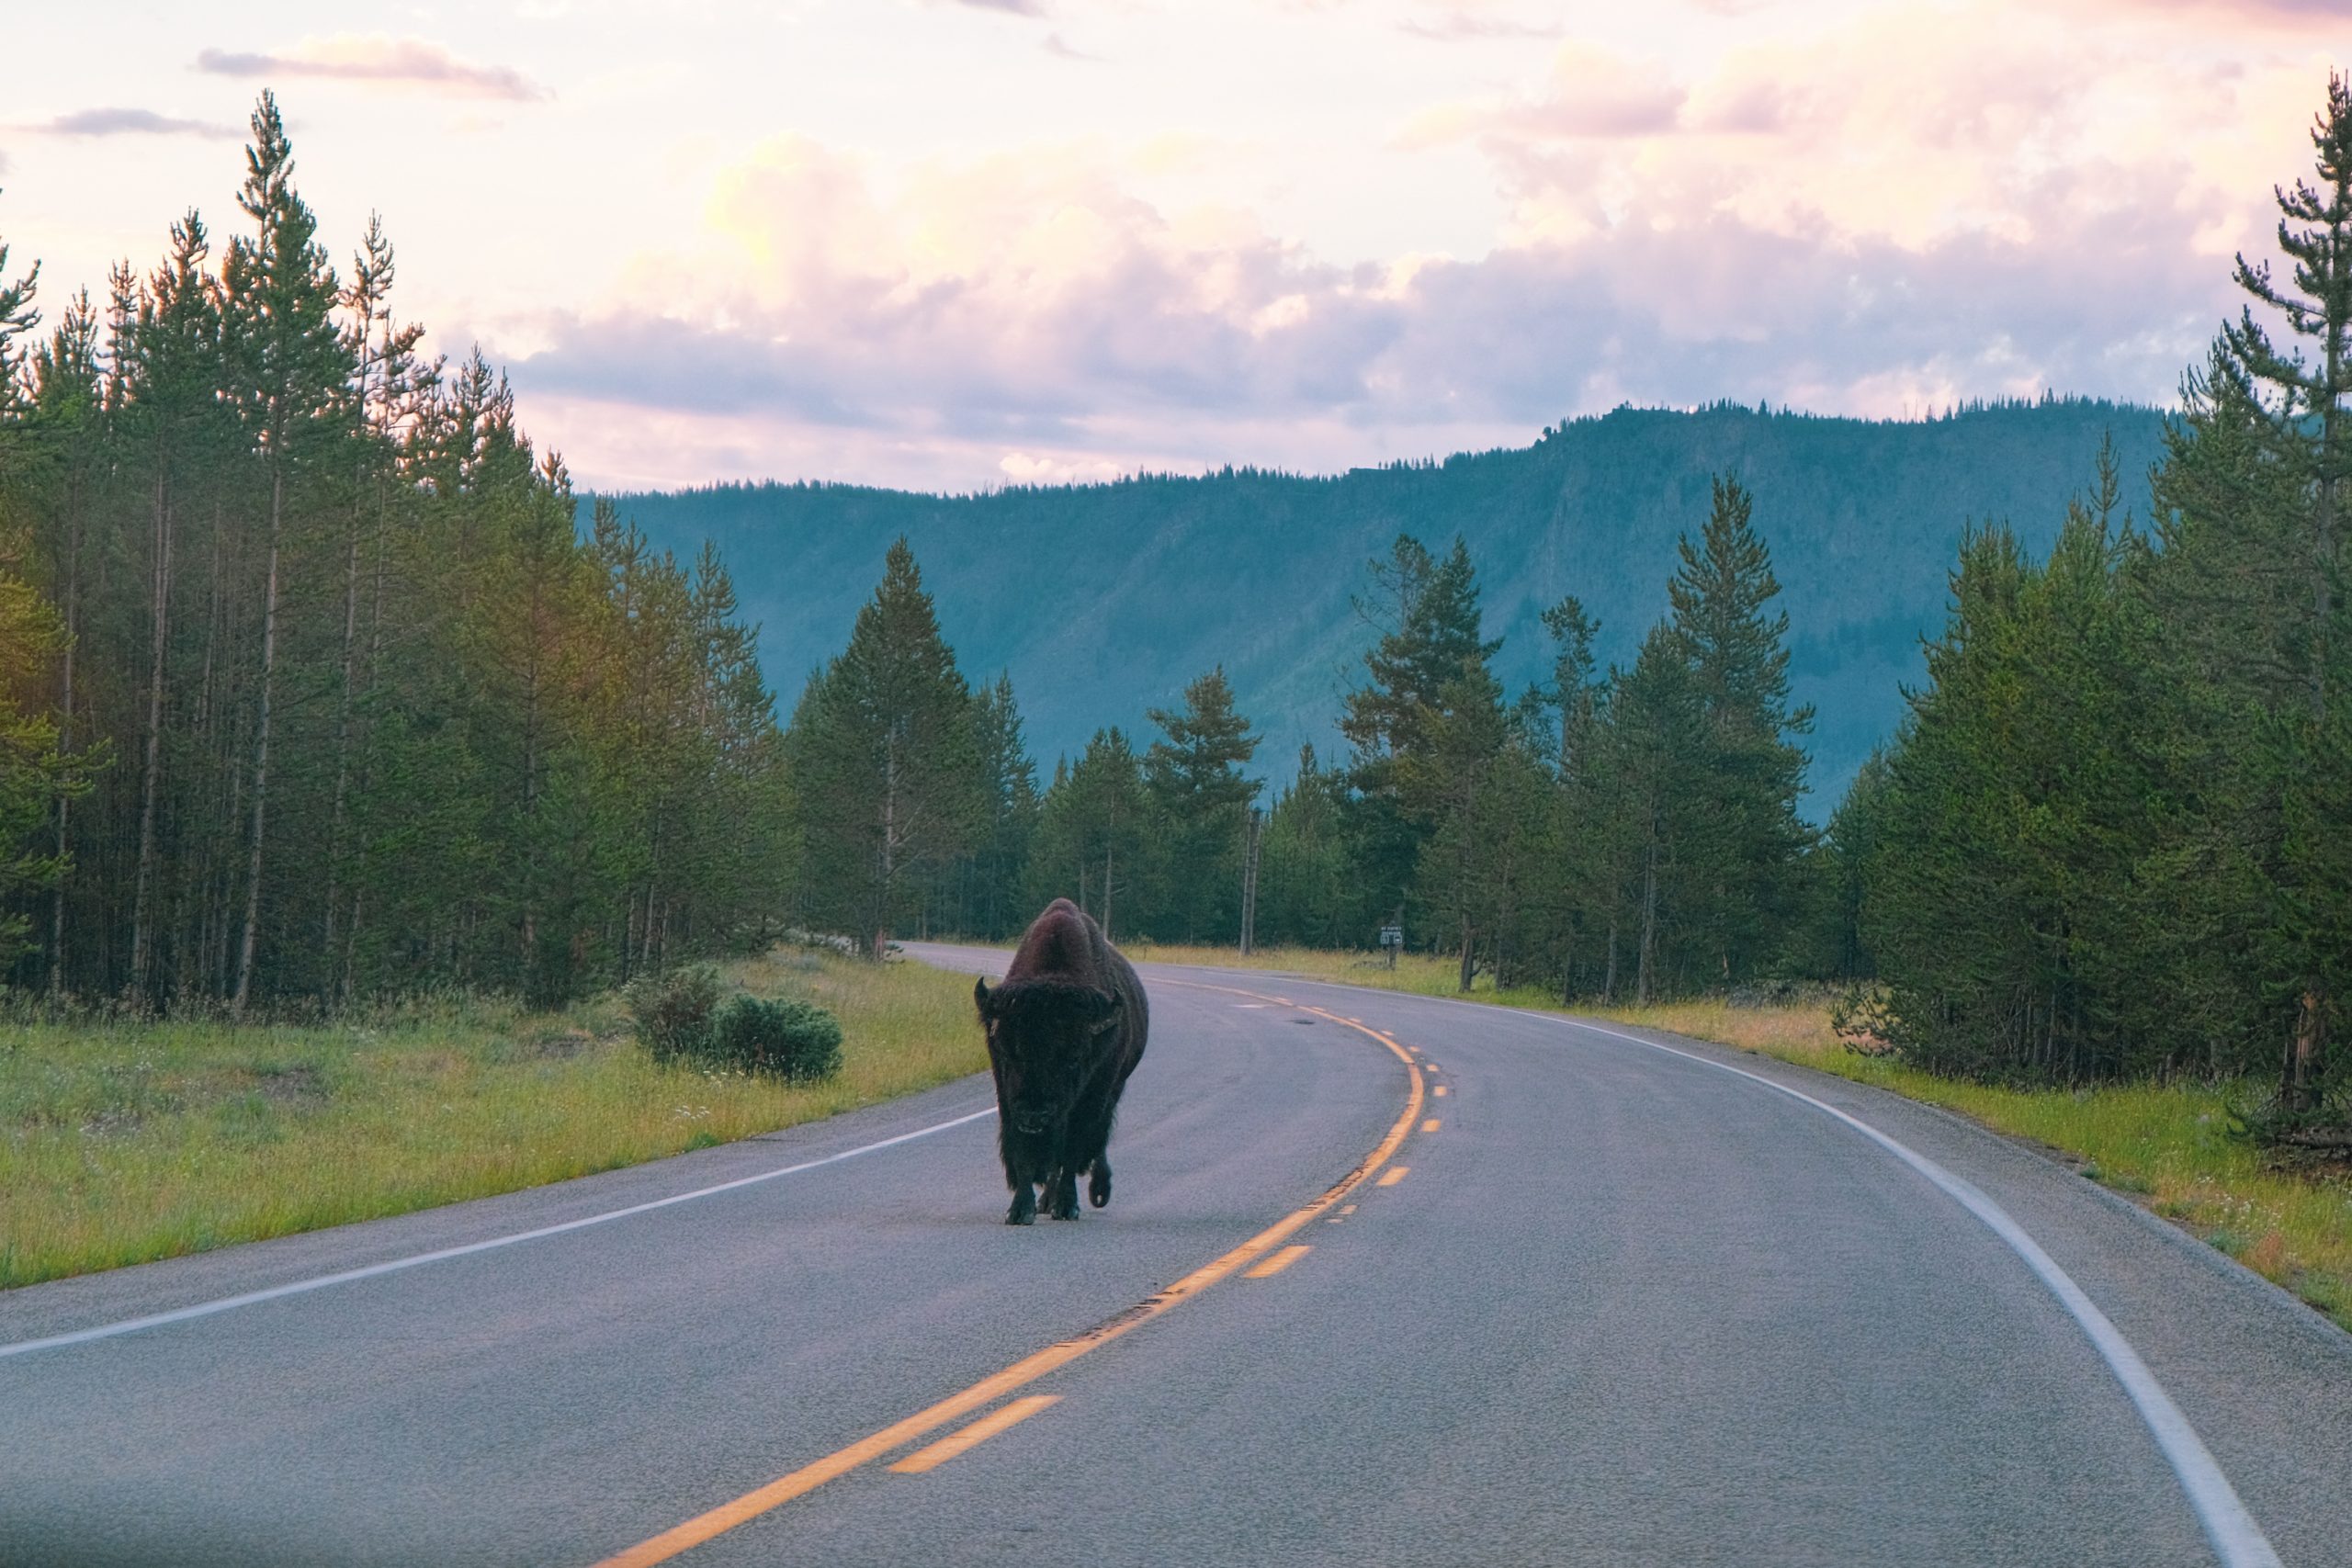 A bison was walking quietly on the road as we drove into Yellowstone early in the morning